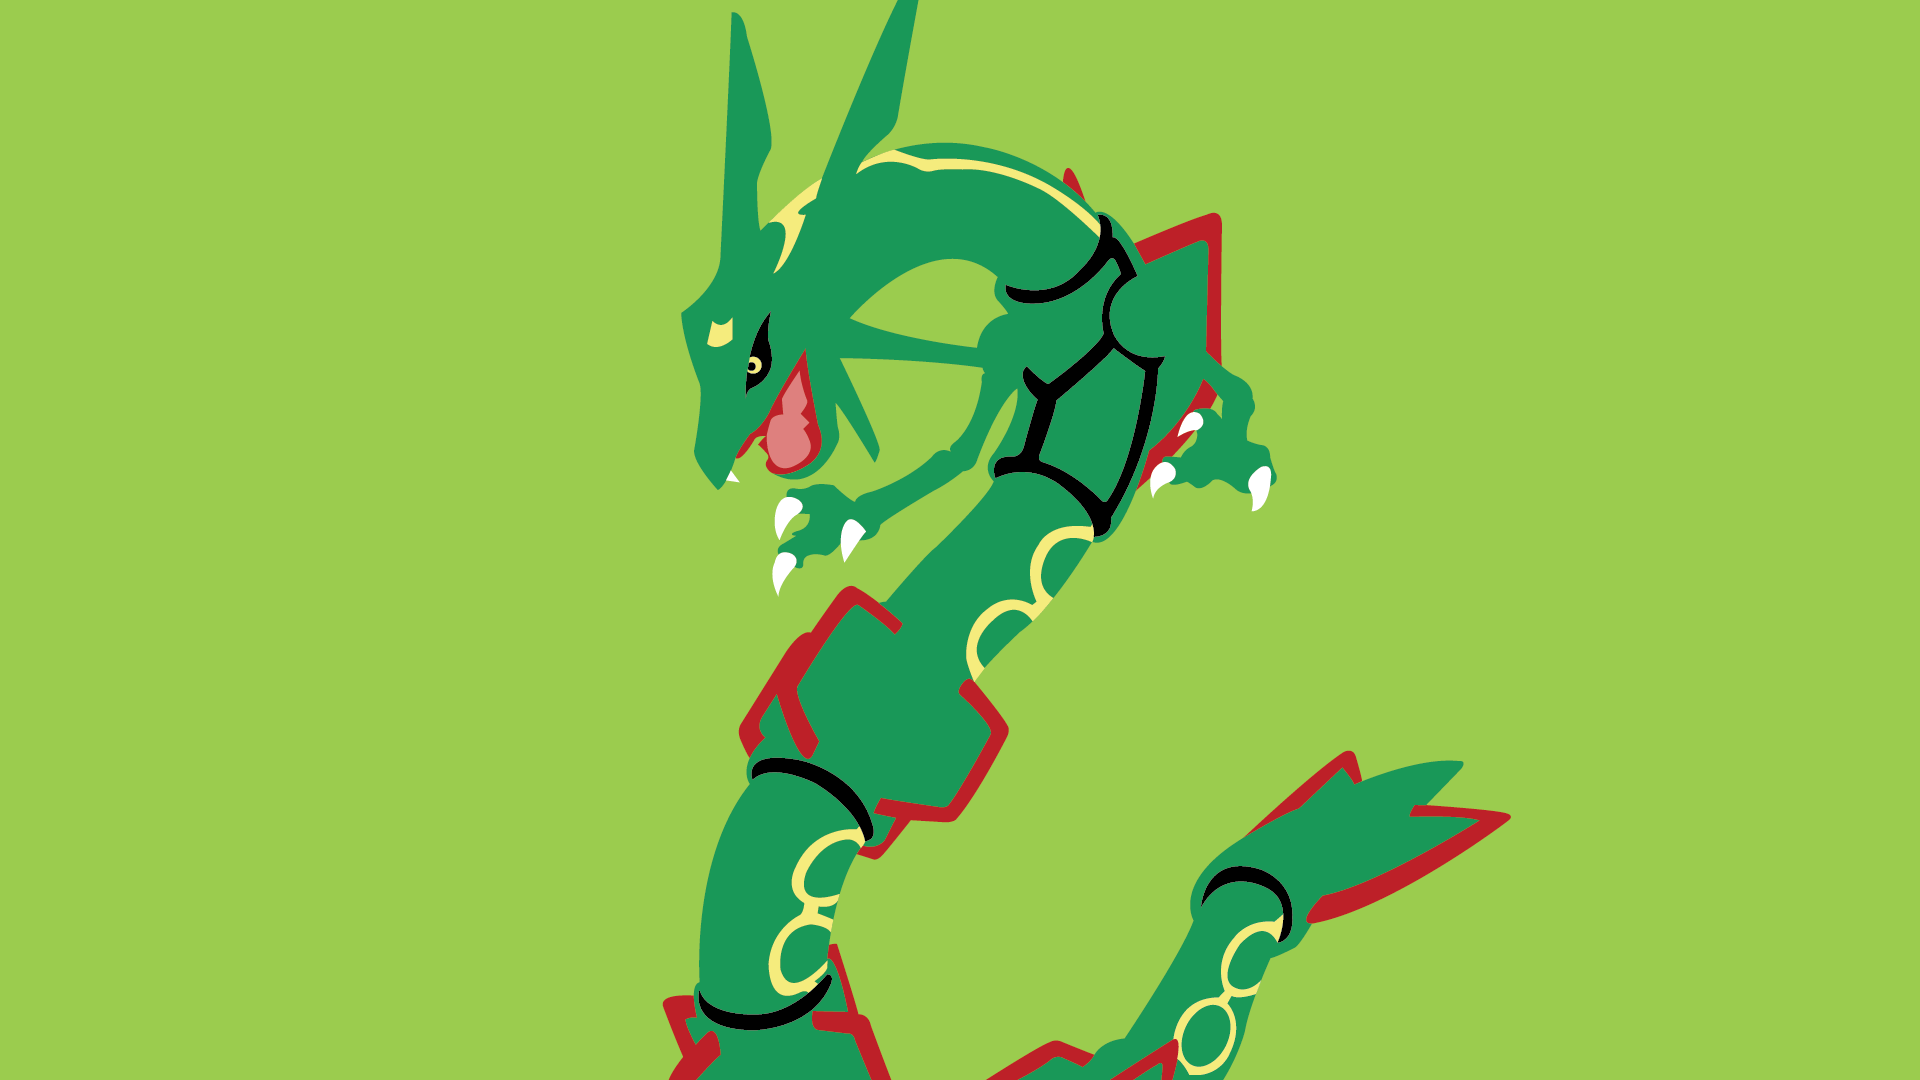 Rayquaza 1080P, 2K, 4K, 5K HD wallpapers free download